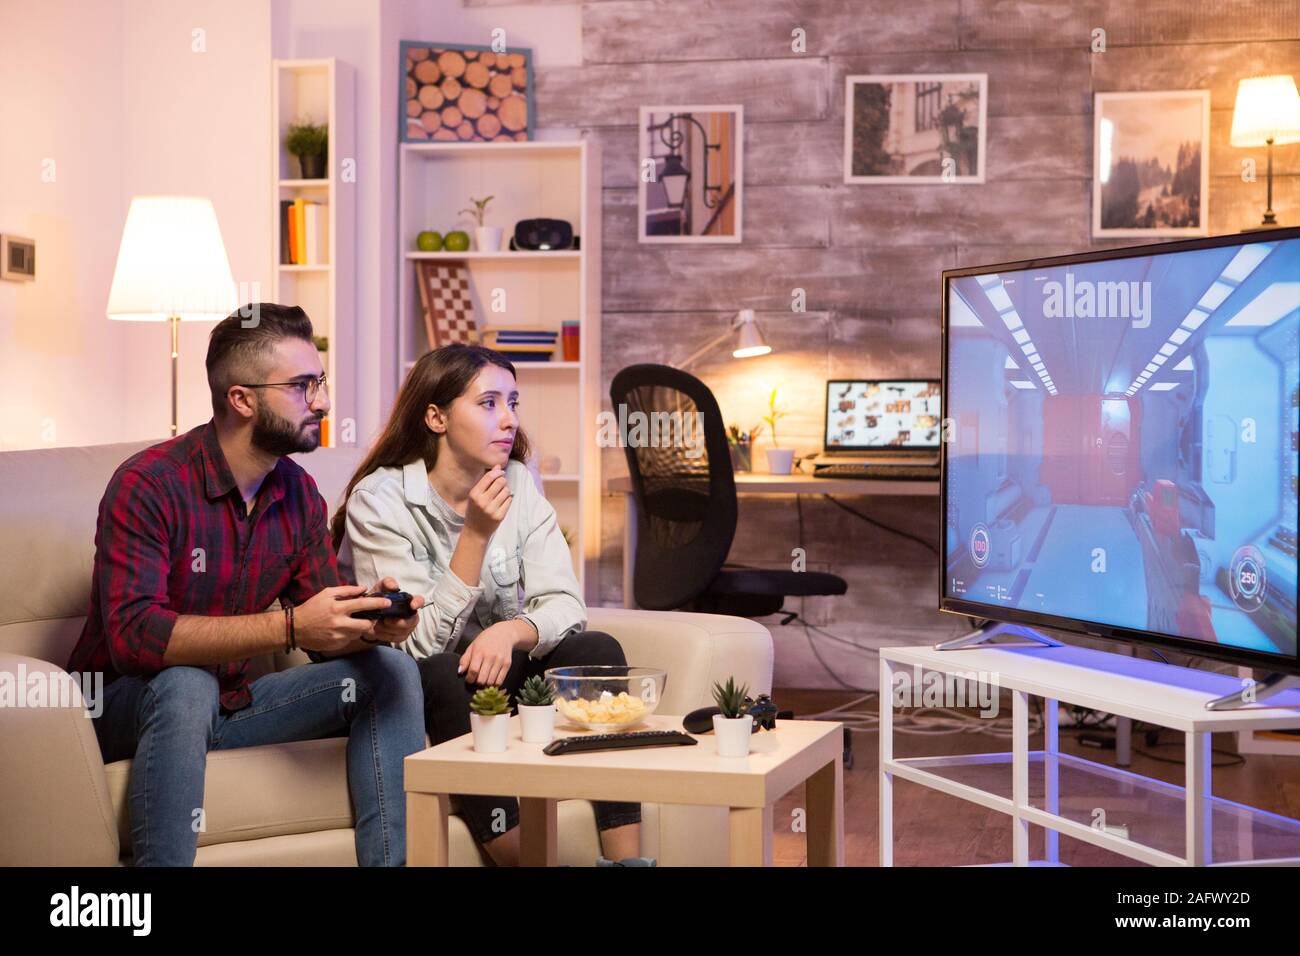 Man sitting on sofa next to his girlfriend and playing video games on television. Stock Photo